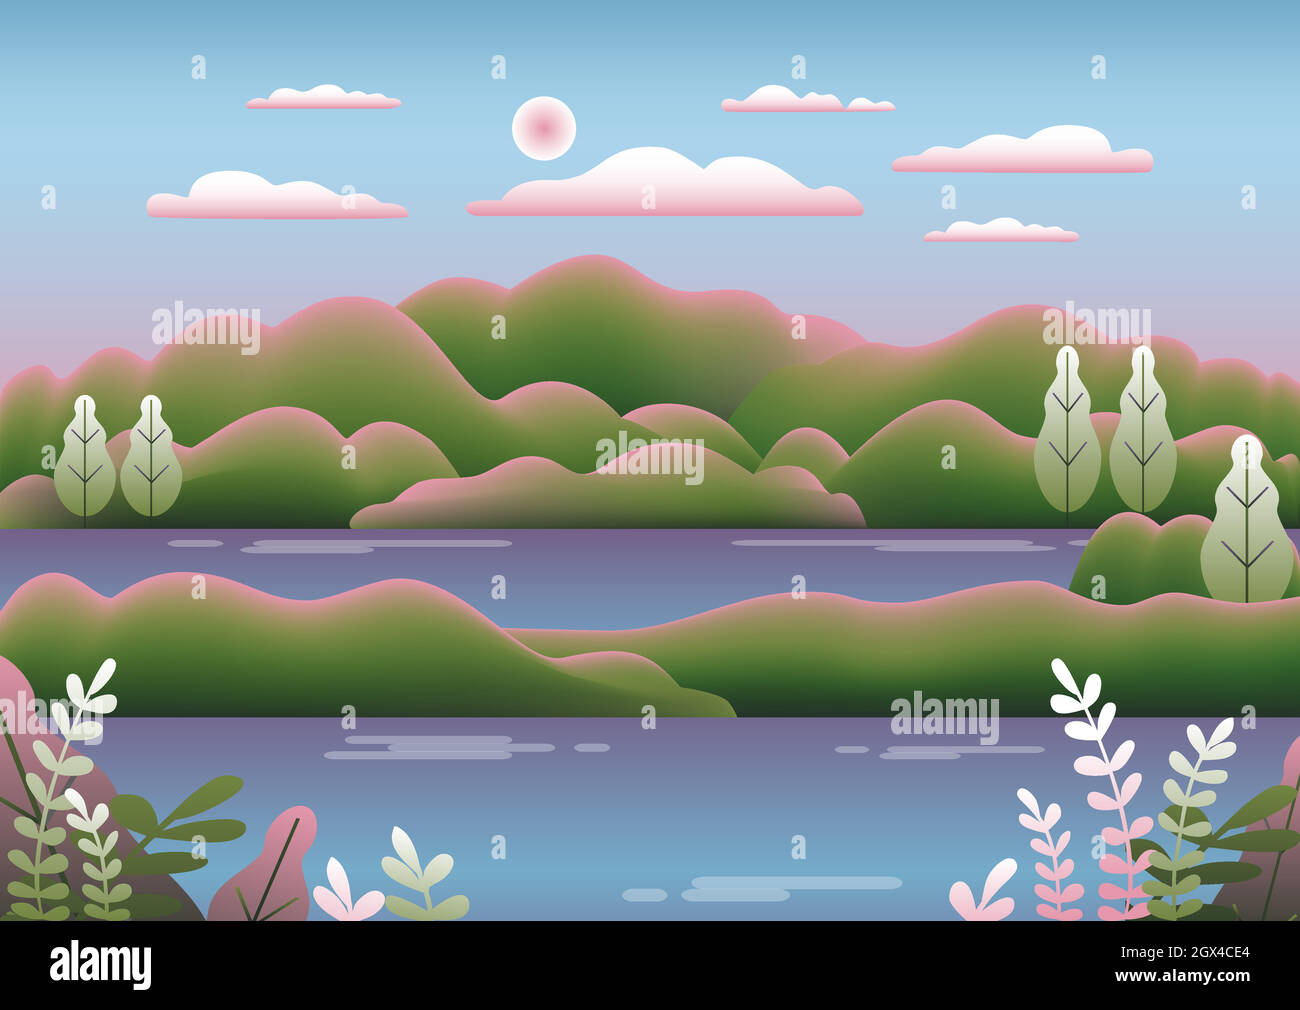 Hills landscape in flat style design. Beautiful field, meadow, mountains and sky. Rural location with valley, lake, river, hills, forest, trees. Green blue gradient colors. Cartoon background vector Stock Vector